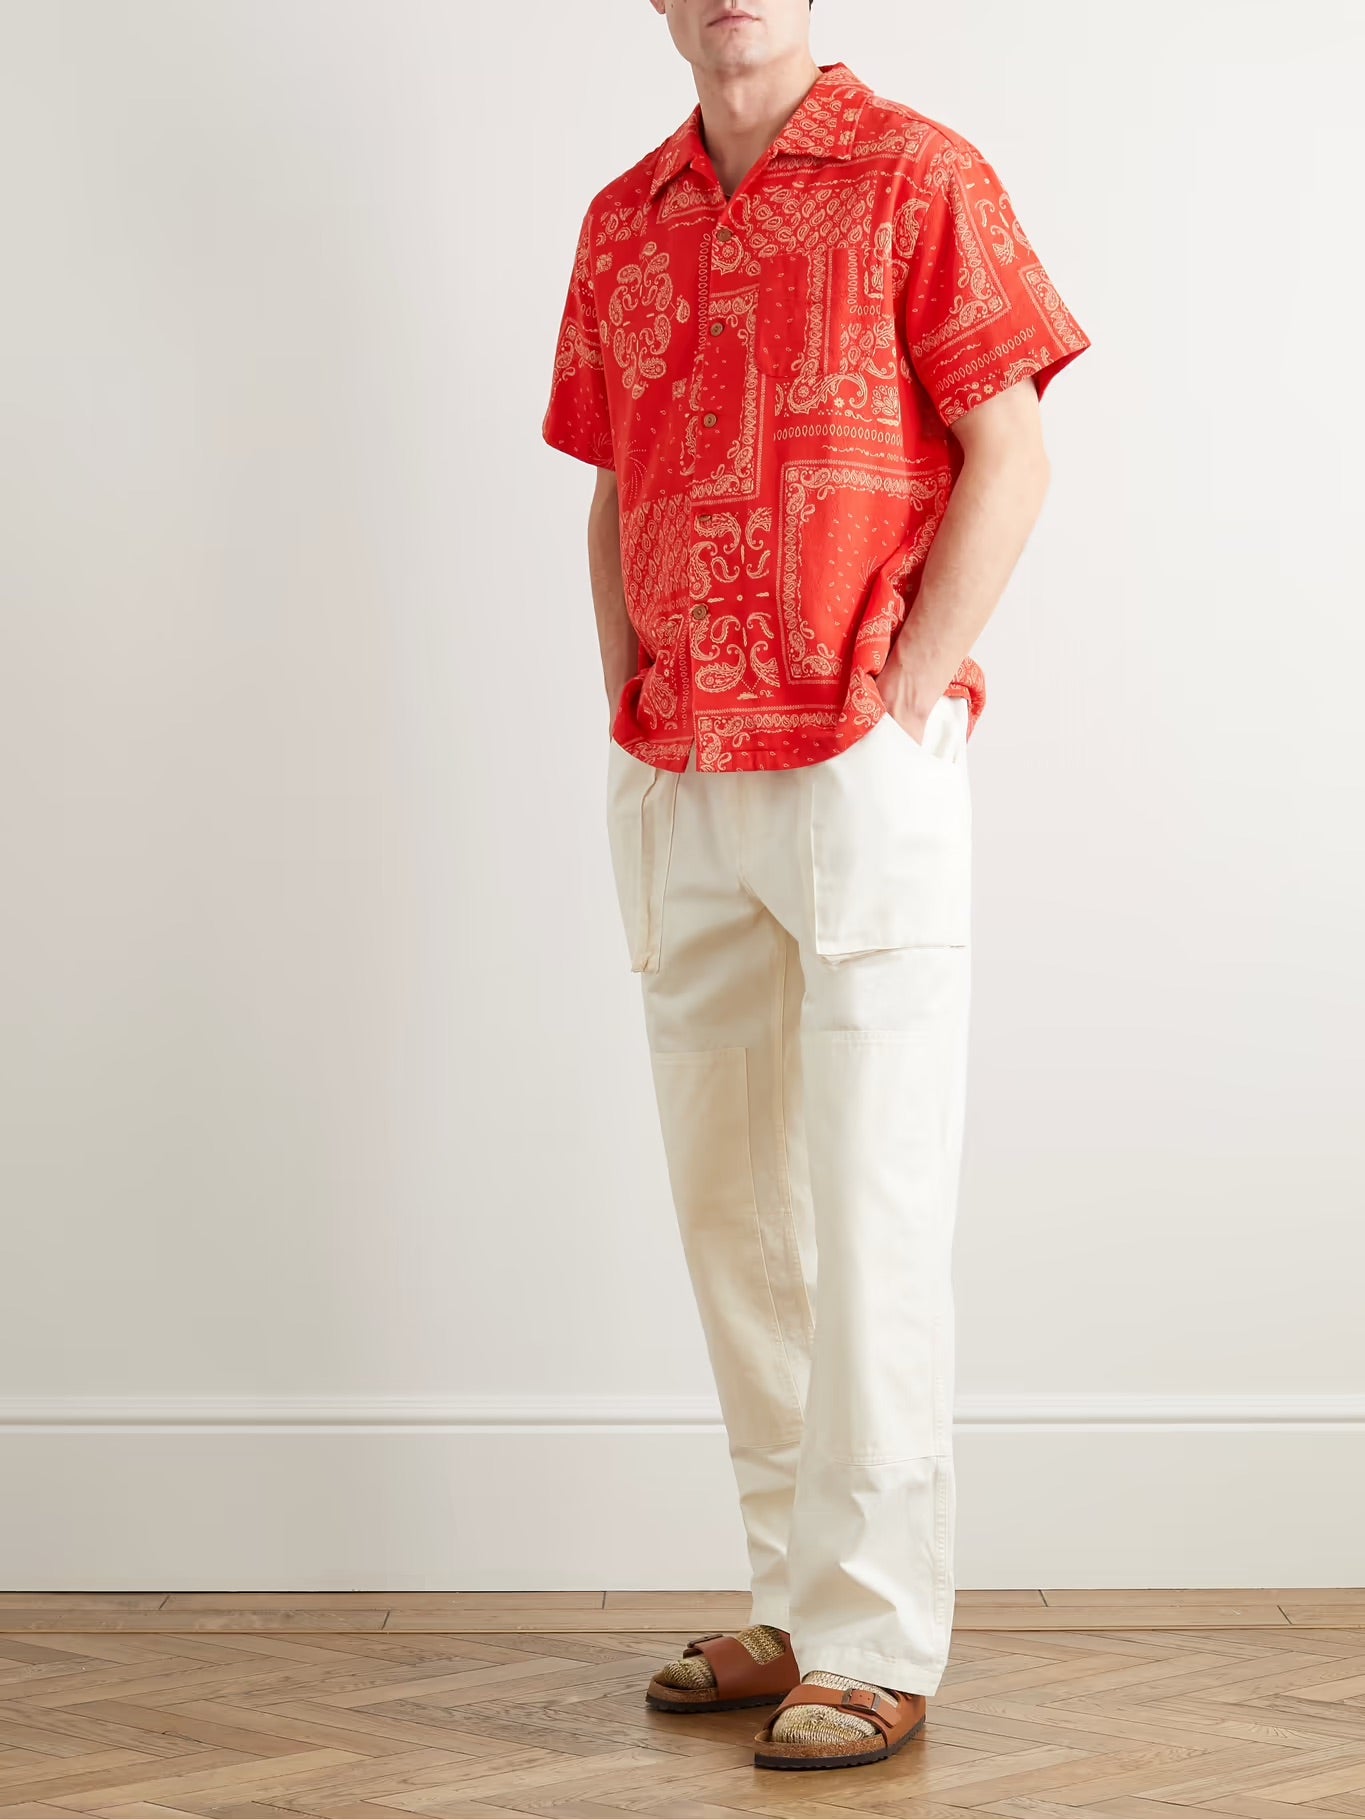 Nudie Jeans - NUDIE JEANS JACQUARD COTTON SHIRT IN ARON BANDANA - Rent With Thred